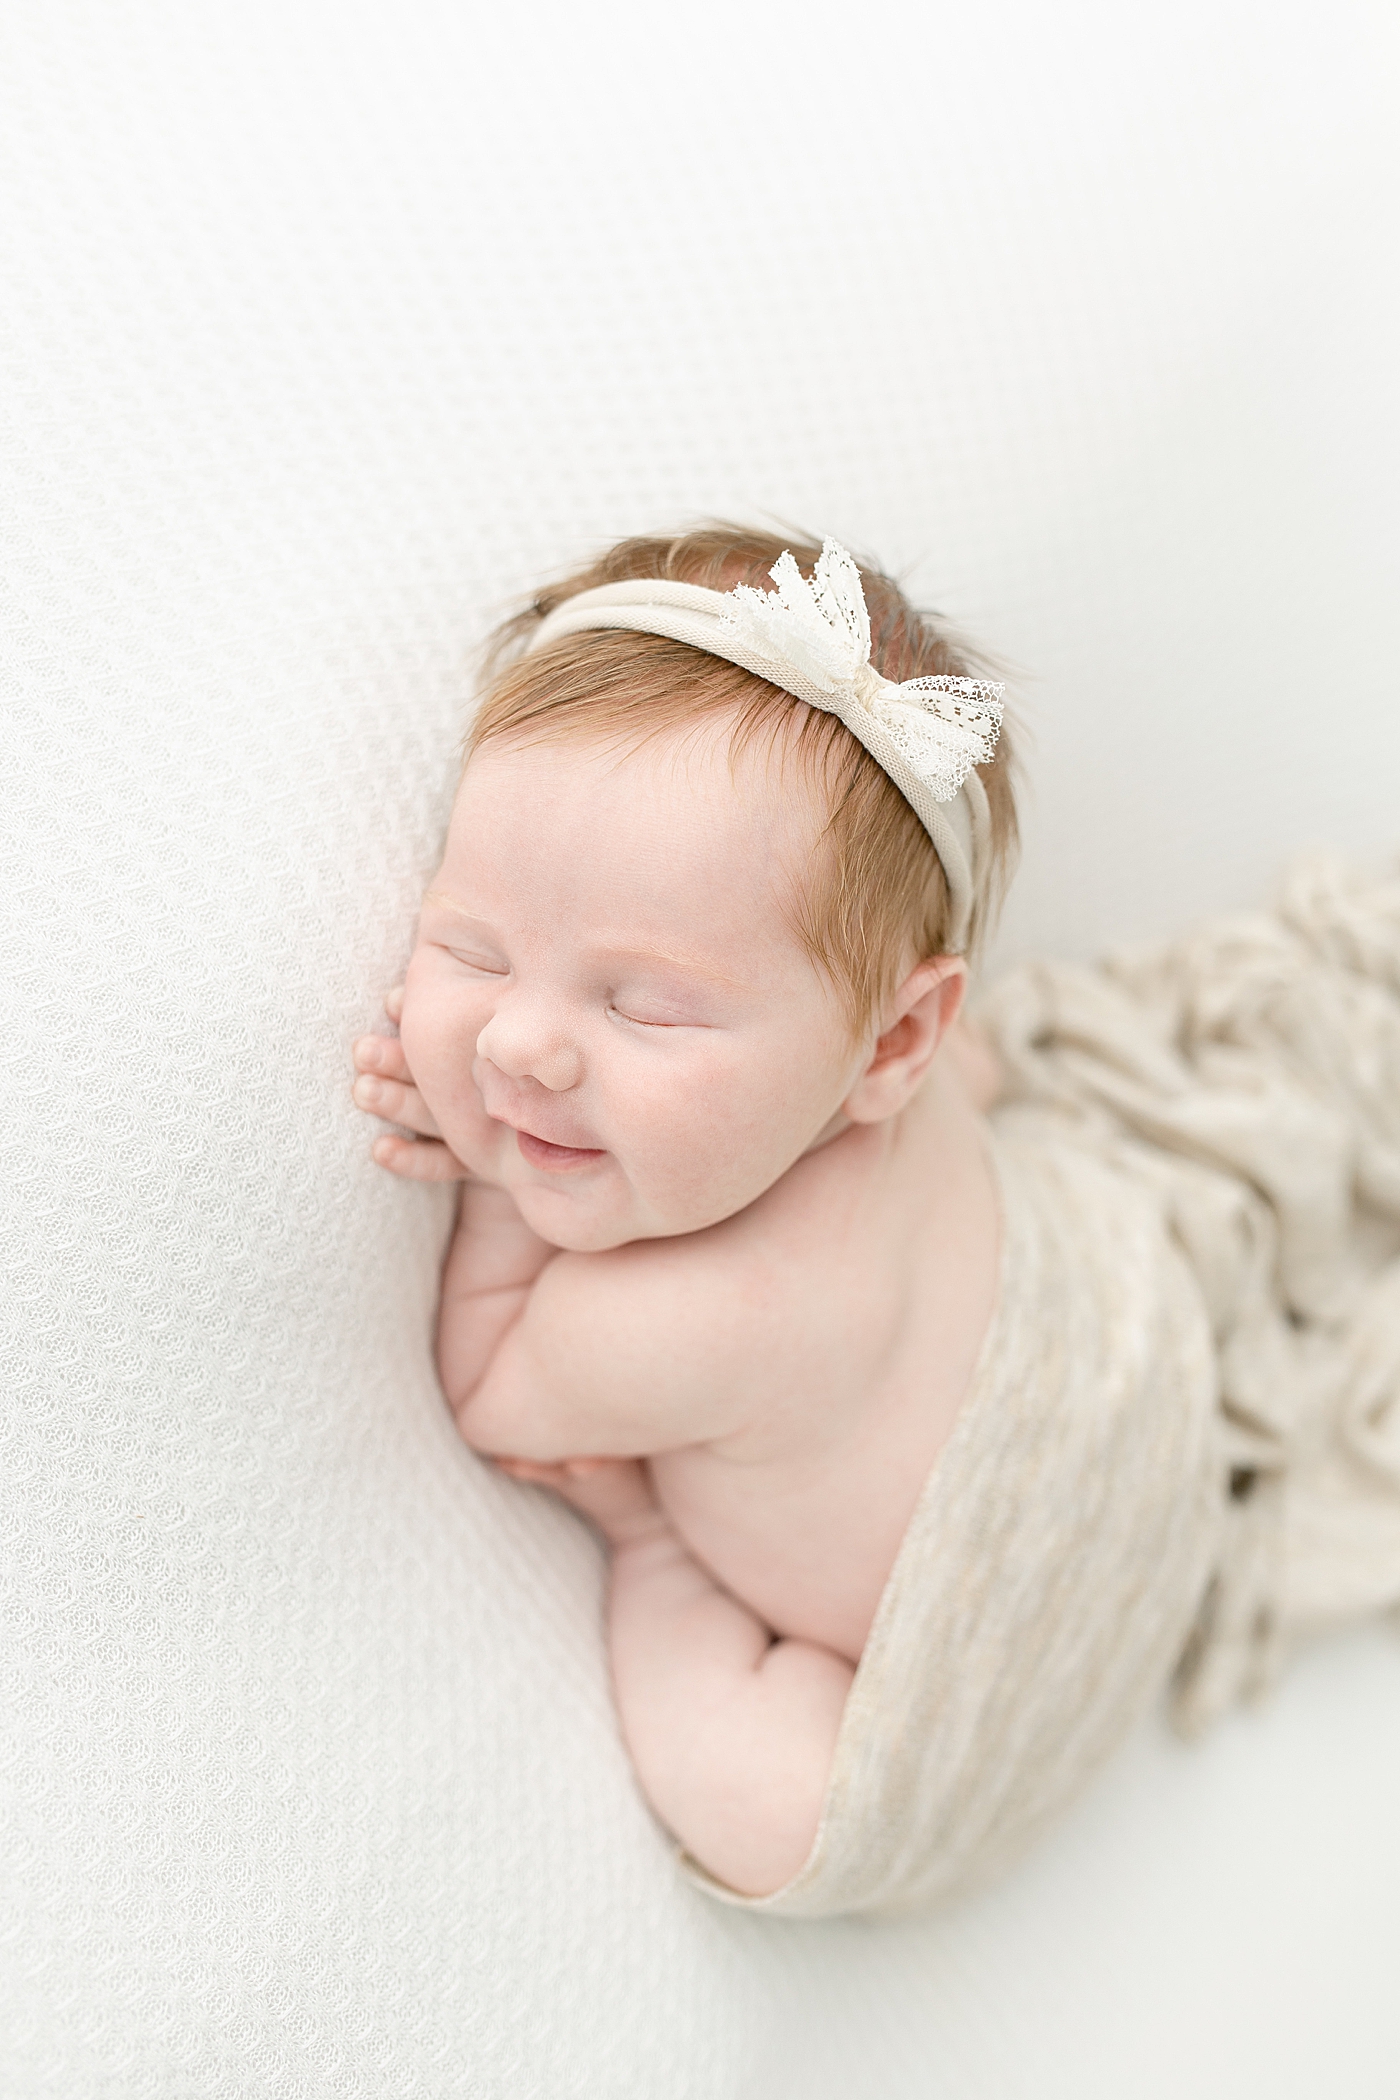 Newborn baby girl smiling wrapped in gray swaddle | Photo by Little Sunshine Photography